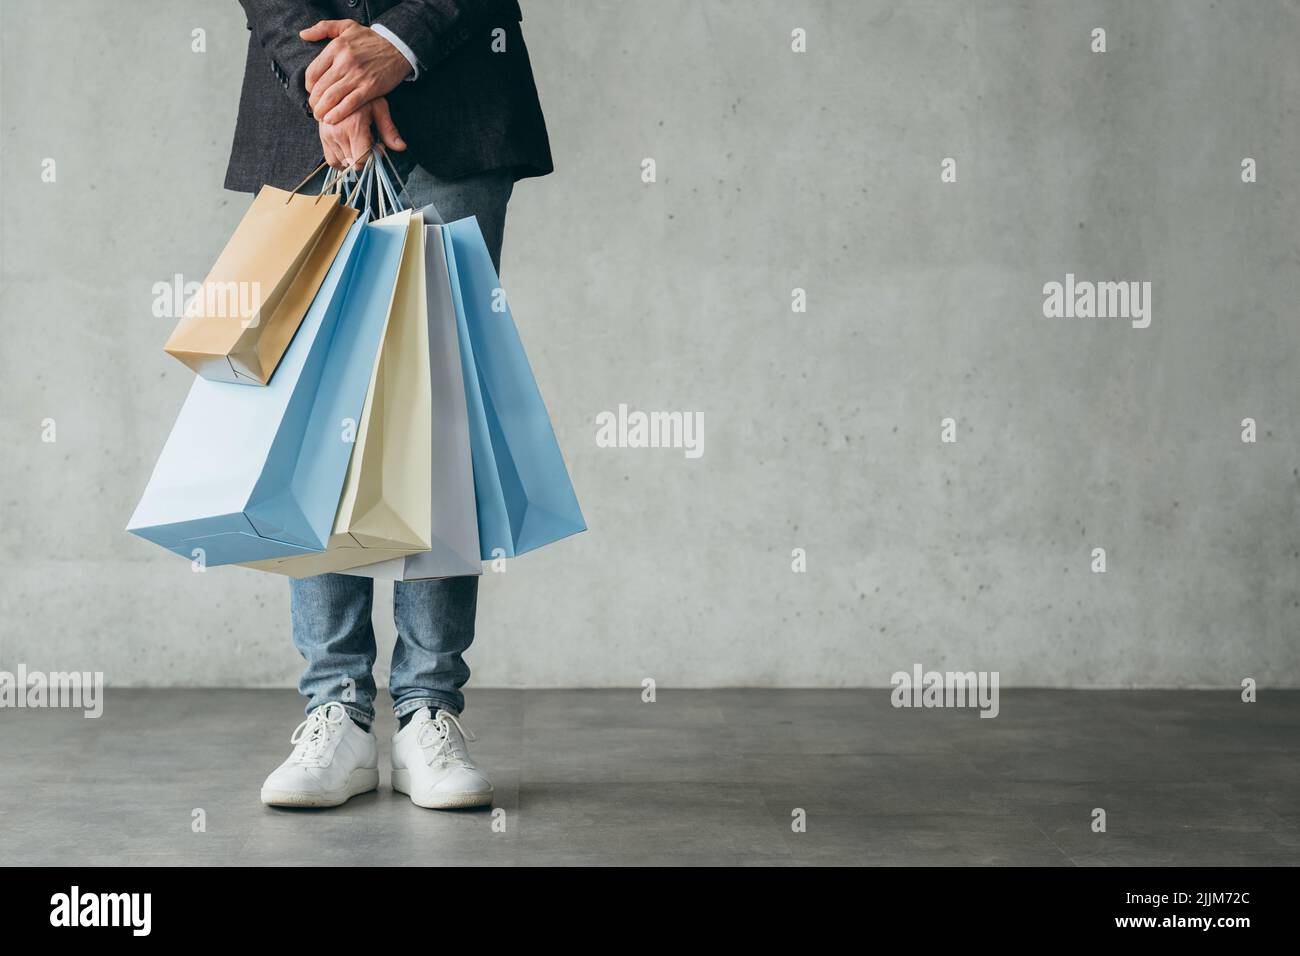 holiday sale shopping consumerism man hold bags Stock Photo